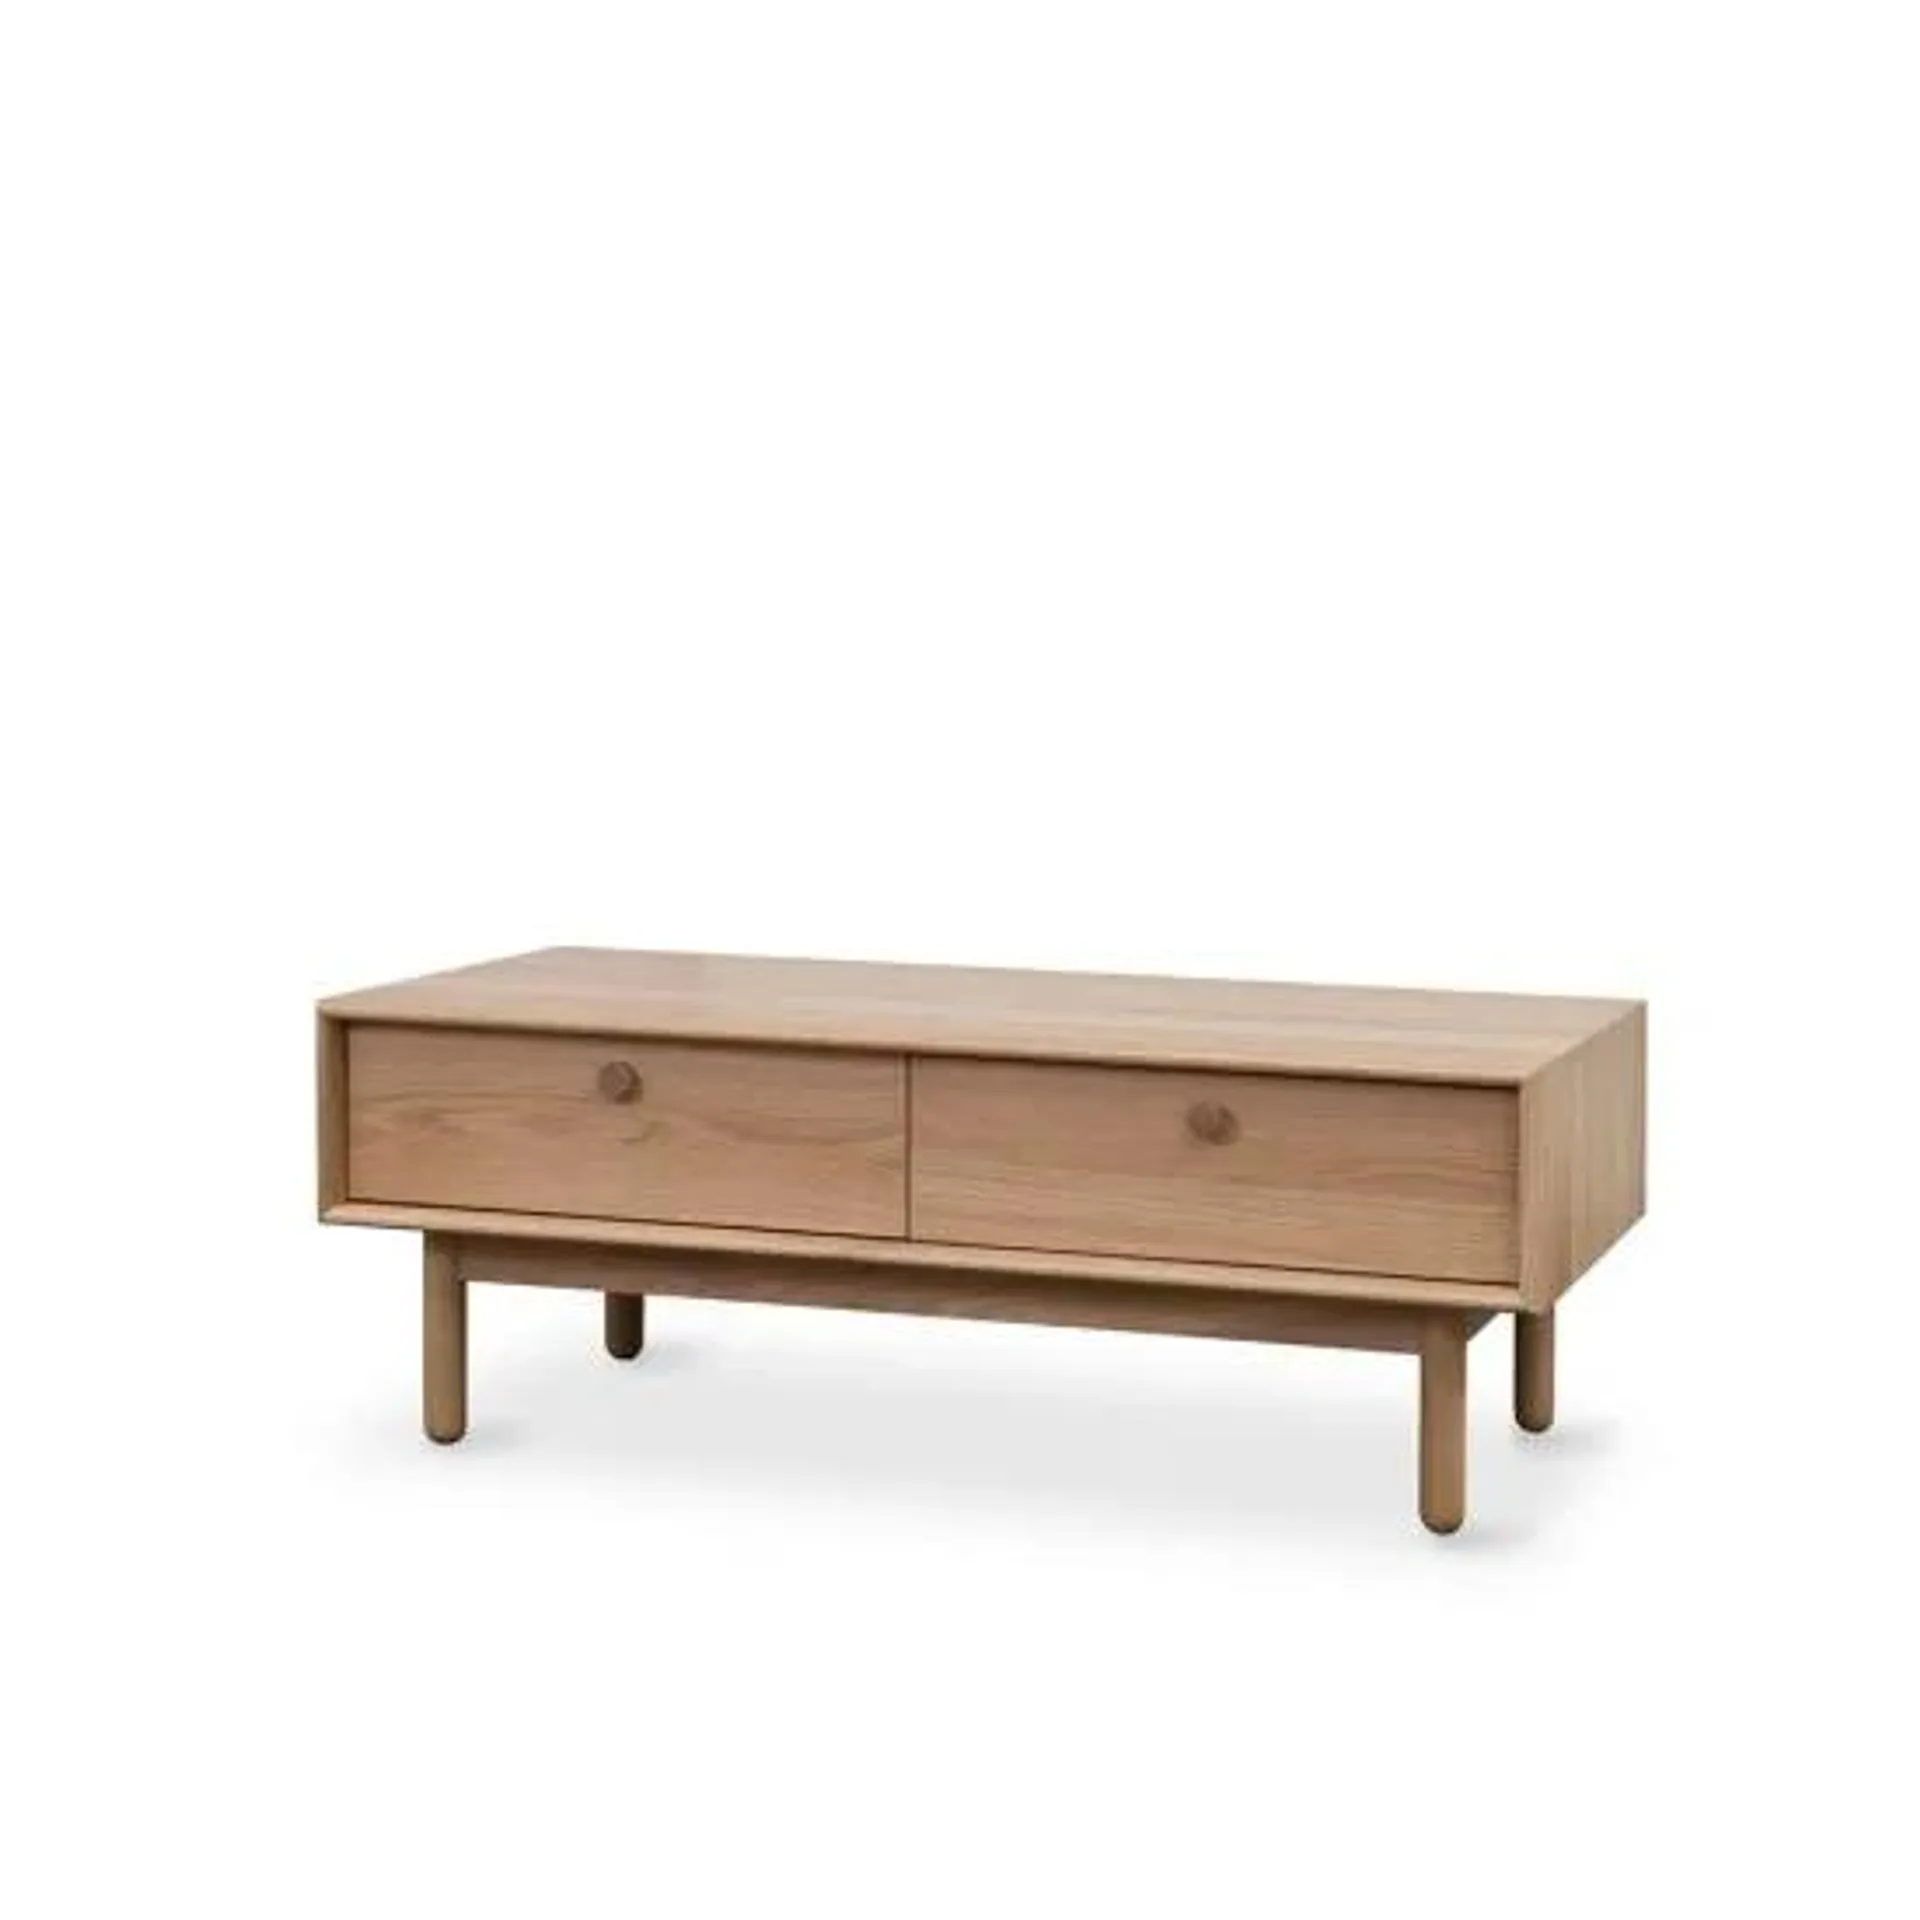 Prague Coffee Table with Drawers